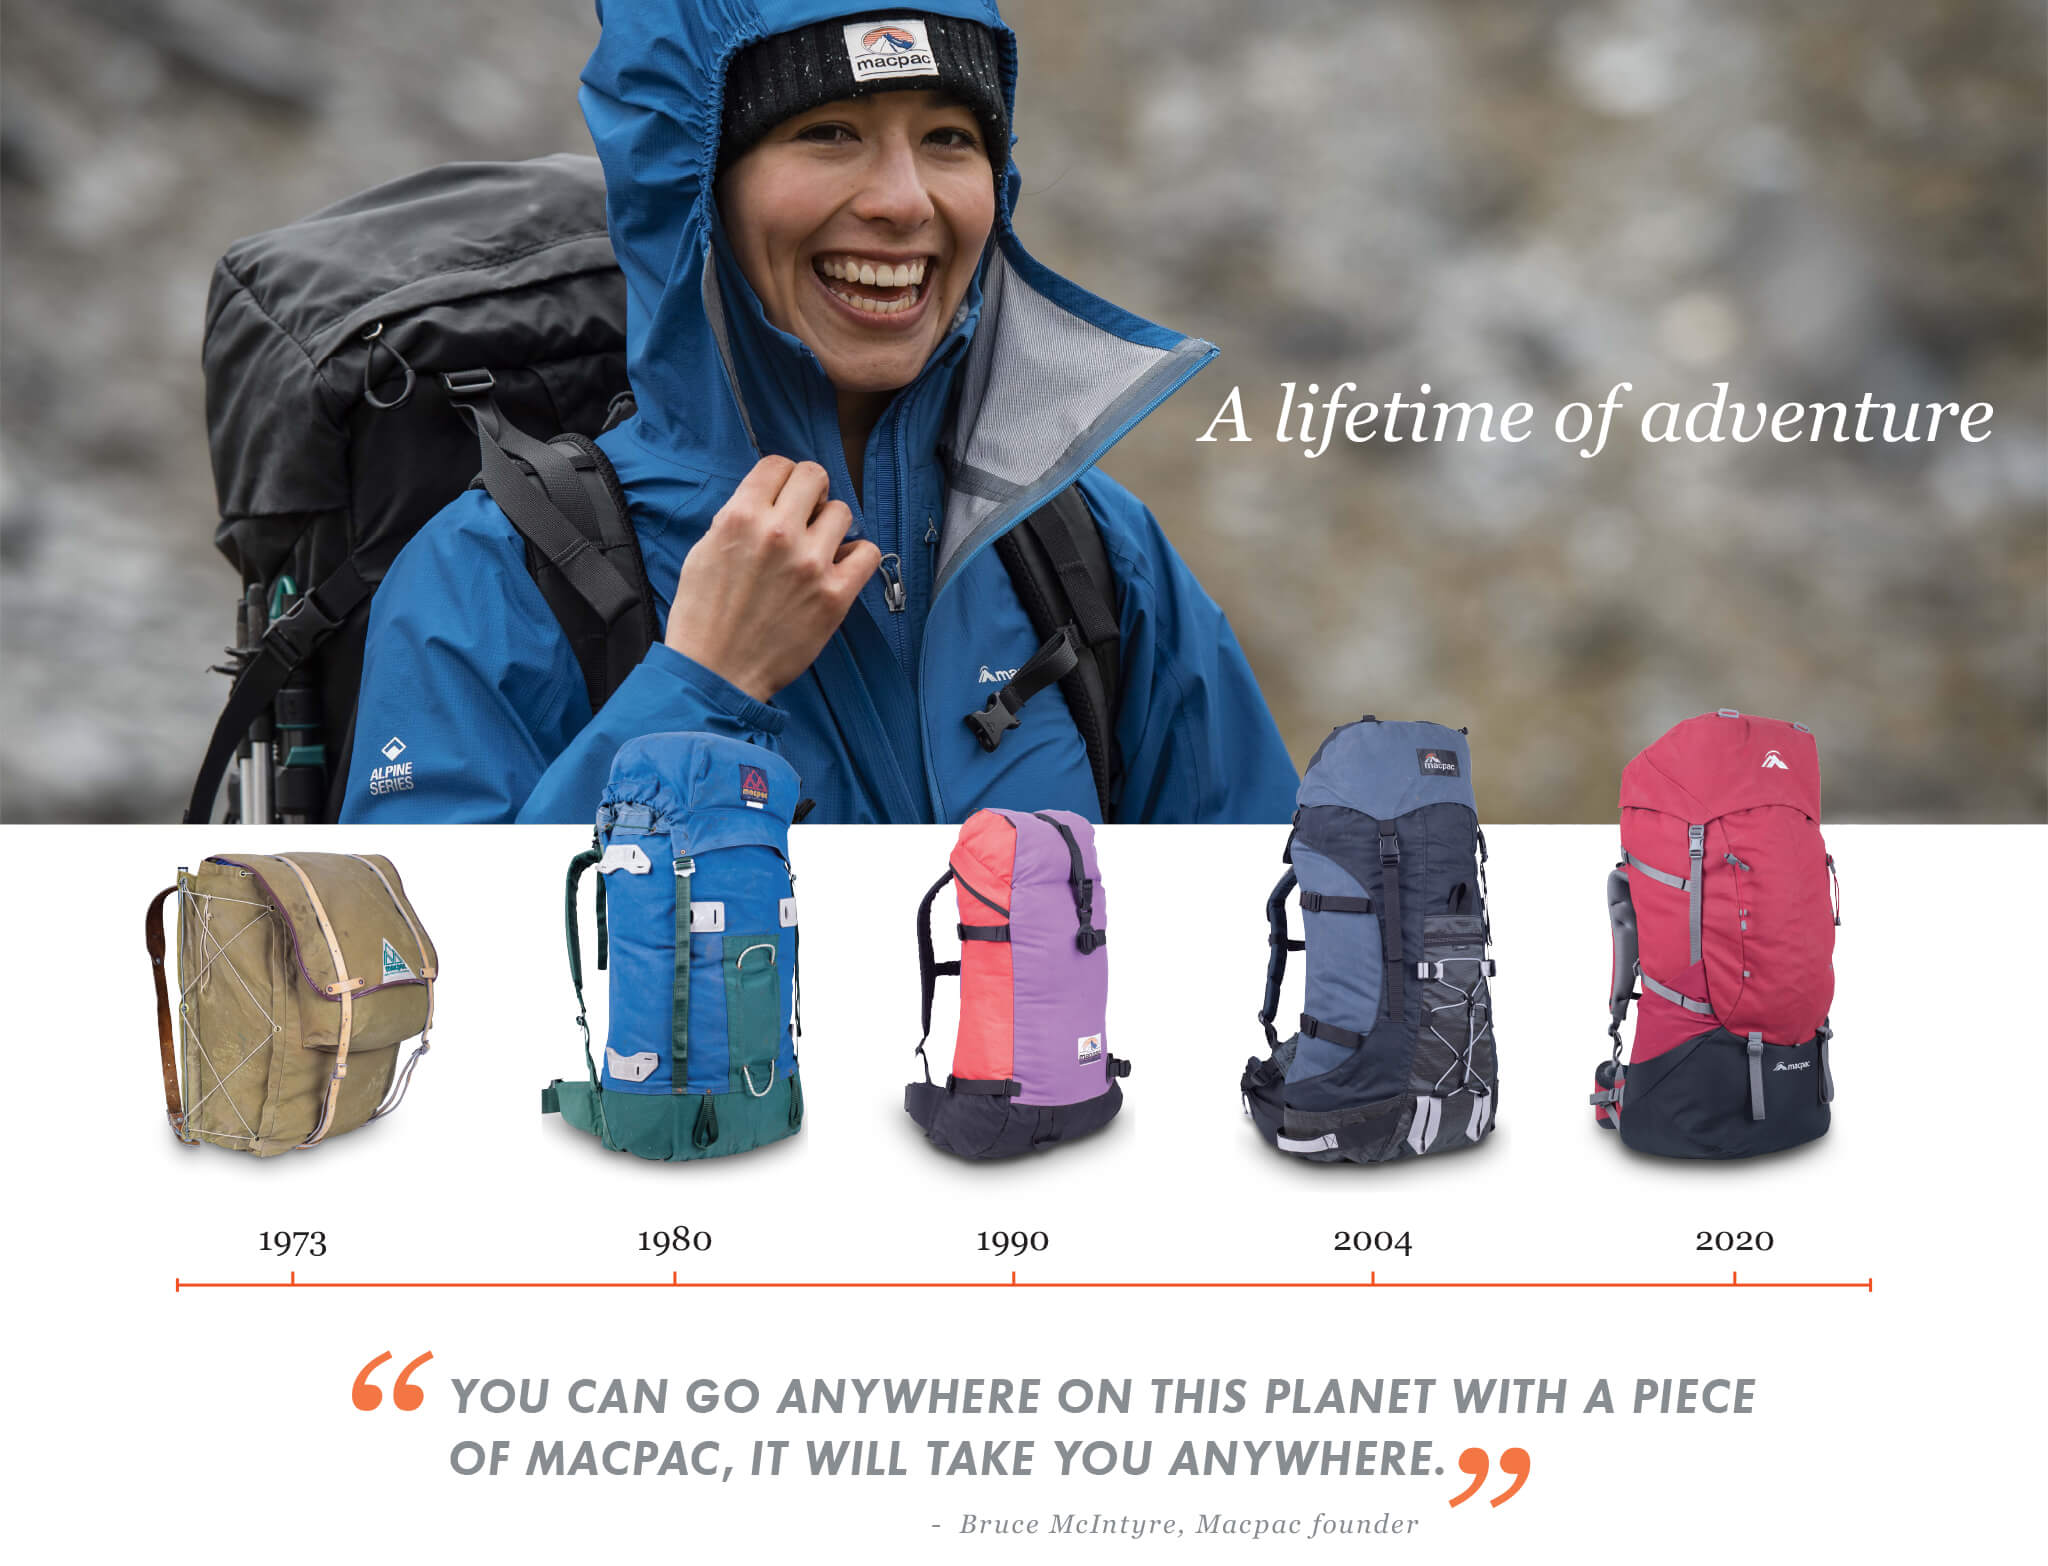 A lifetime of adventure with Quote: My goal was to make the best backpacks for New Zealand's Mountains - Bruce McIntyre, Macpac founder